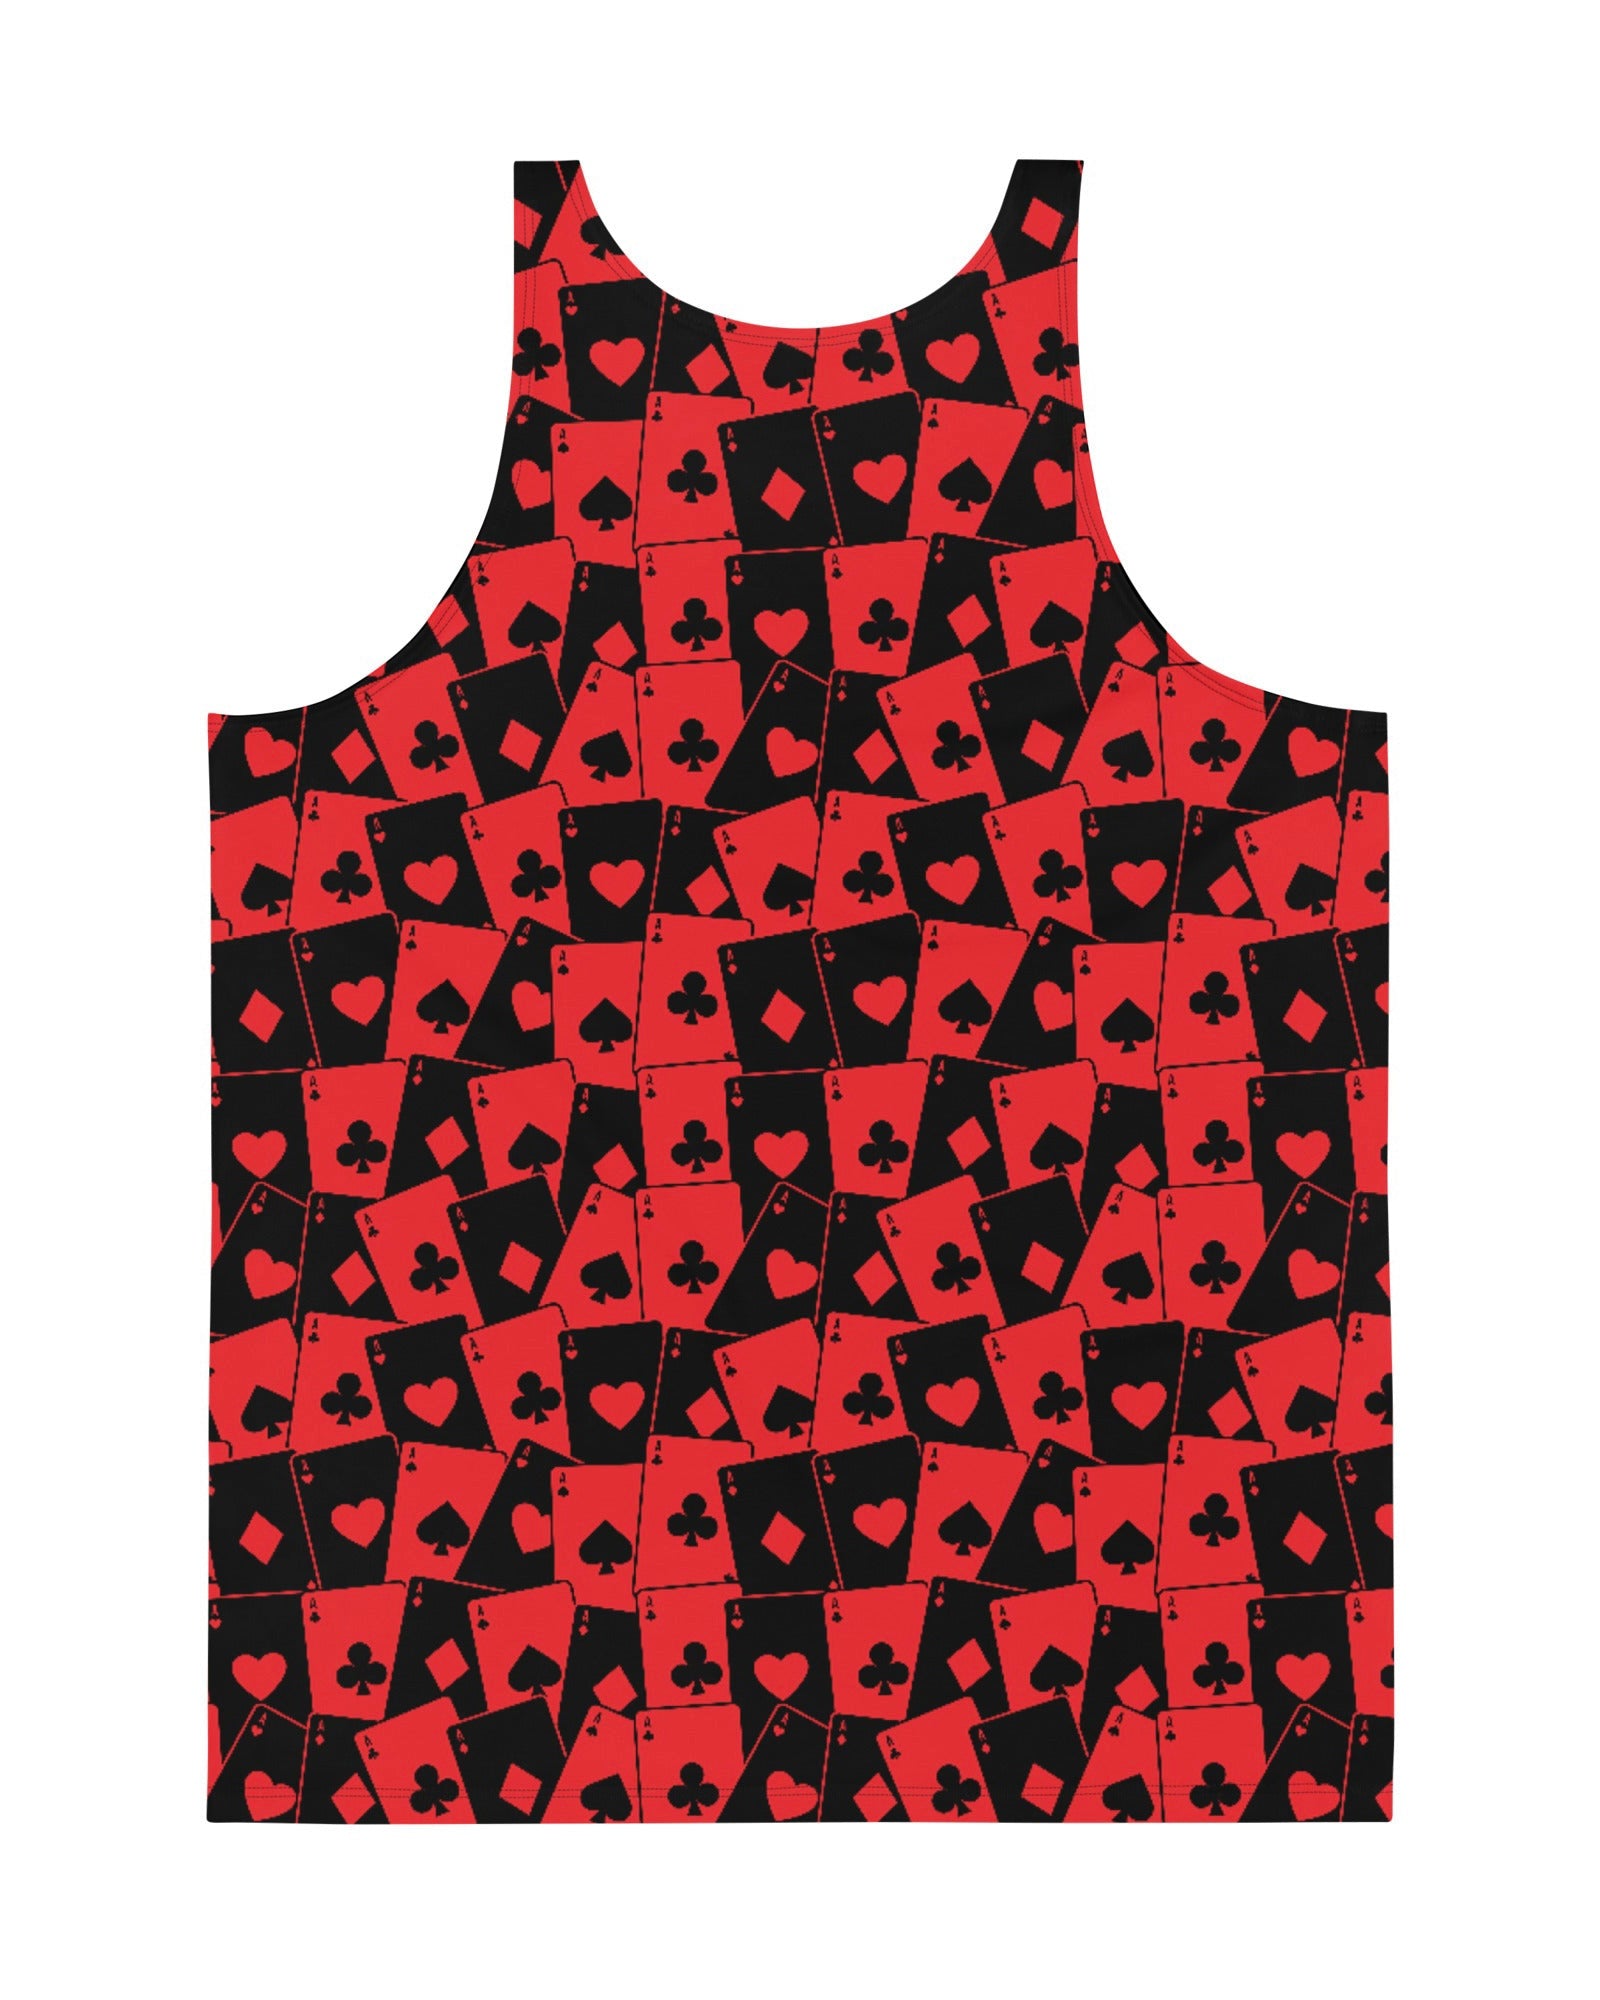 Ace Of Hearts Tank Top, Tank Top, - One Stop Rave